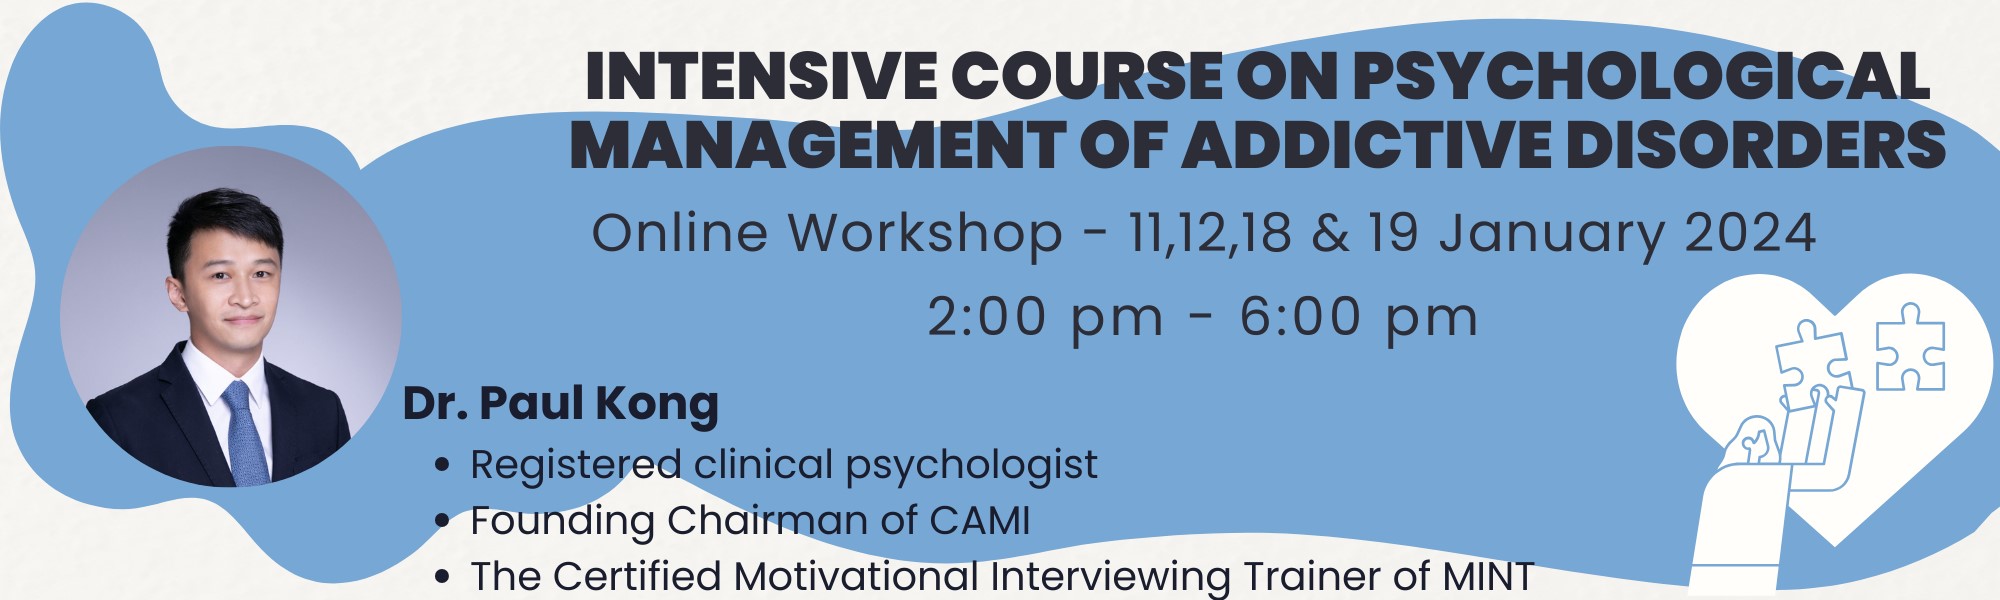 Intensive Course on Psychological Management of Addictive Disorders